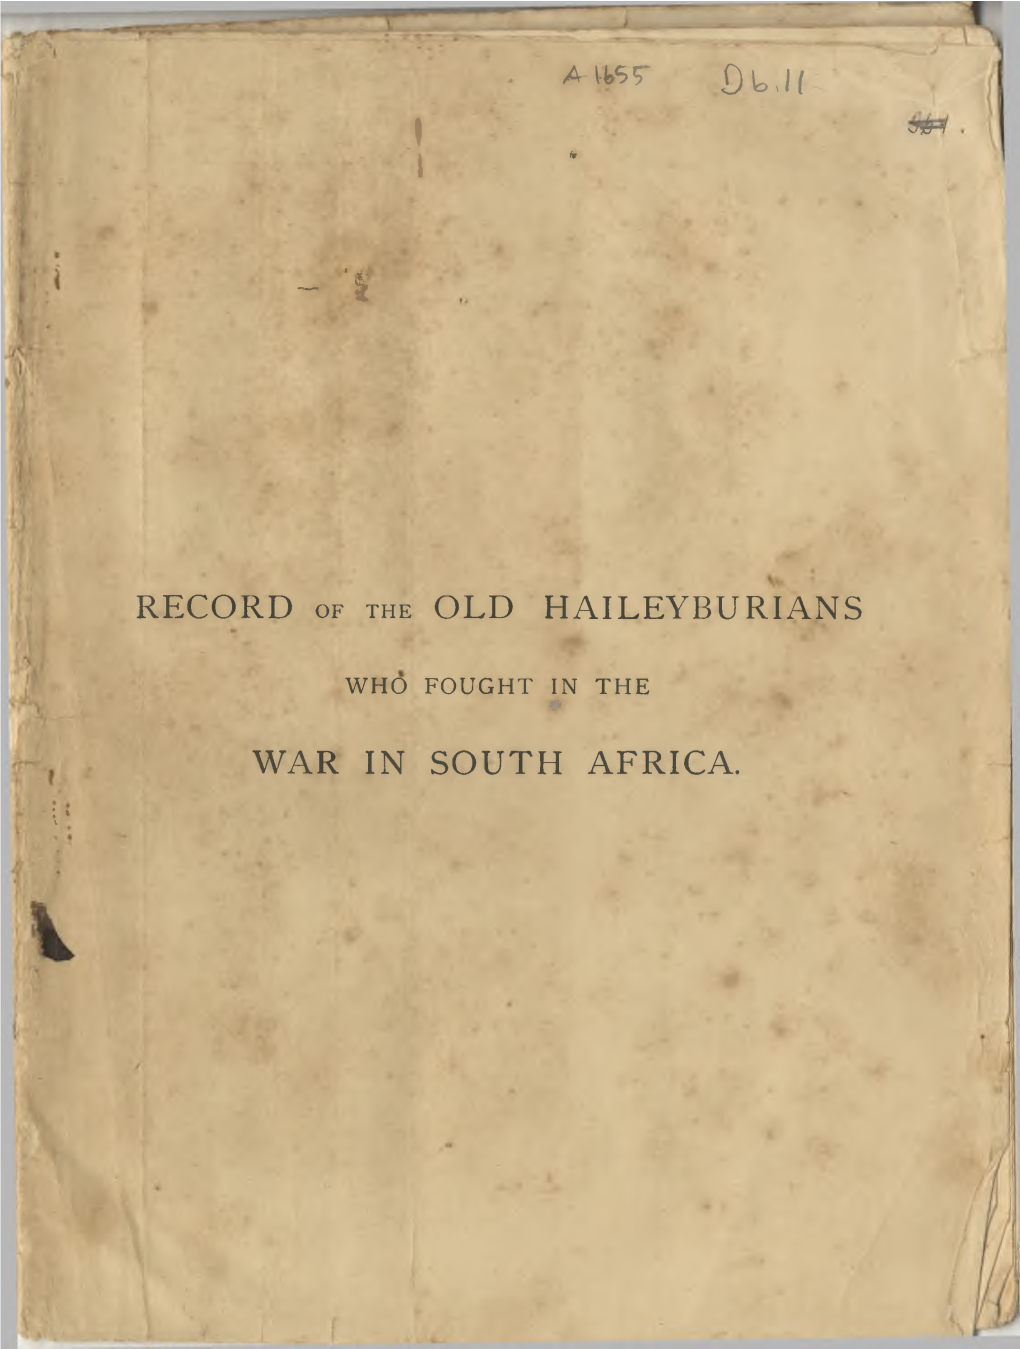 T I RECORD of the OLD HAILEYBURIANS WAR in SOUTH